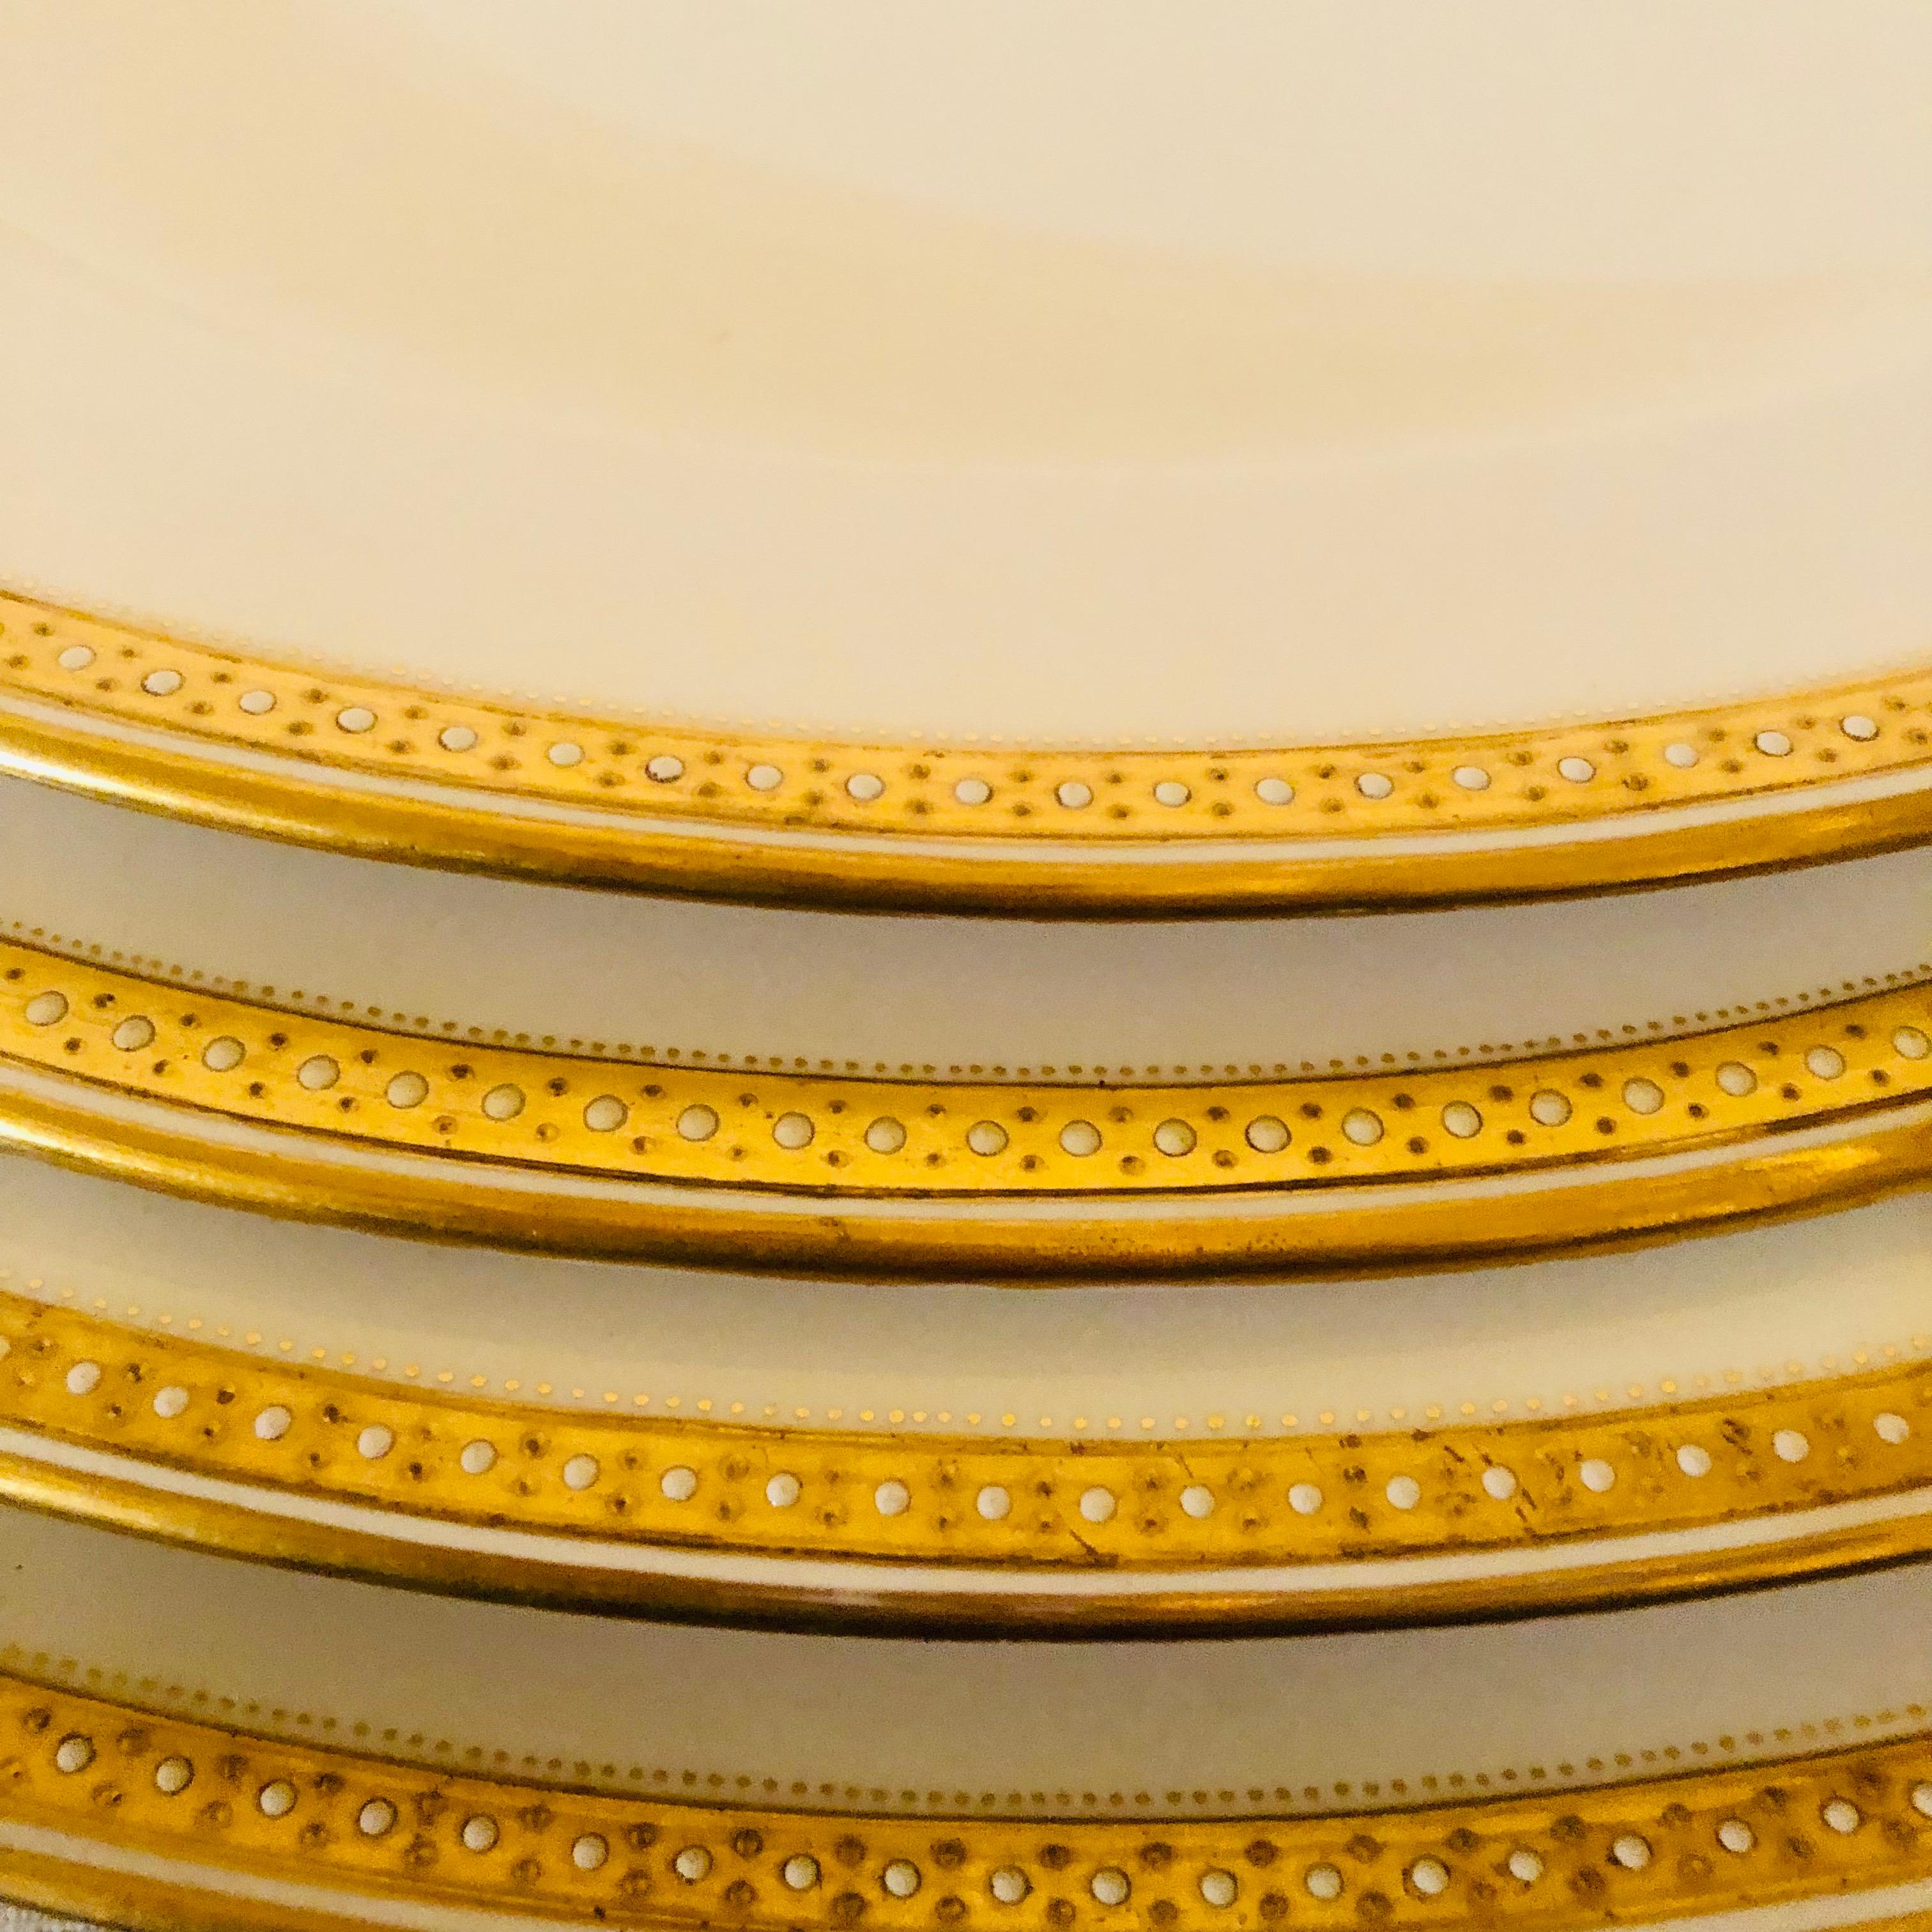 English Nest of Four Spode Copeland Serving Platters With Gold Border and White Jeweling